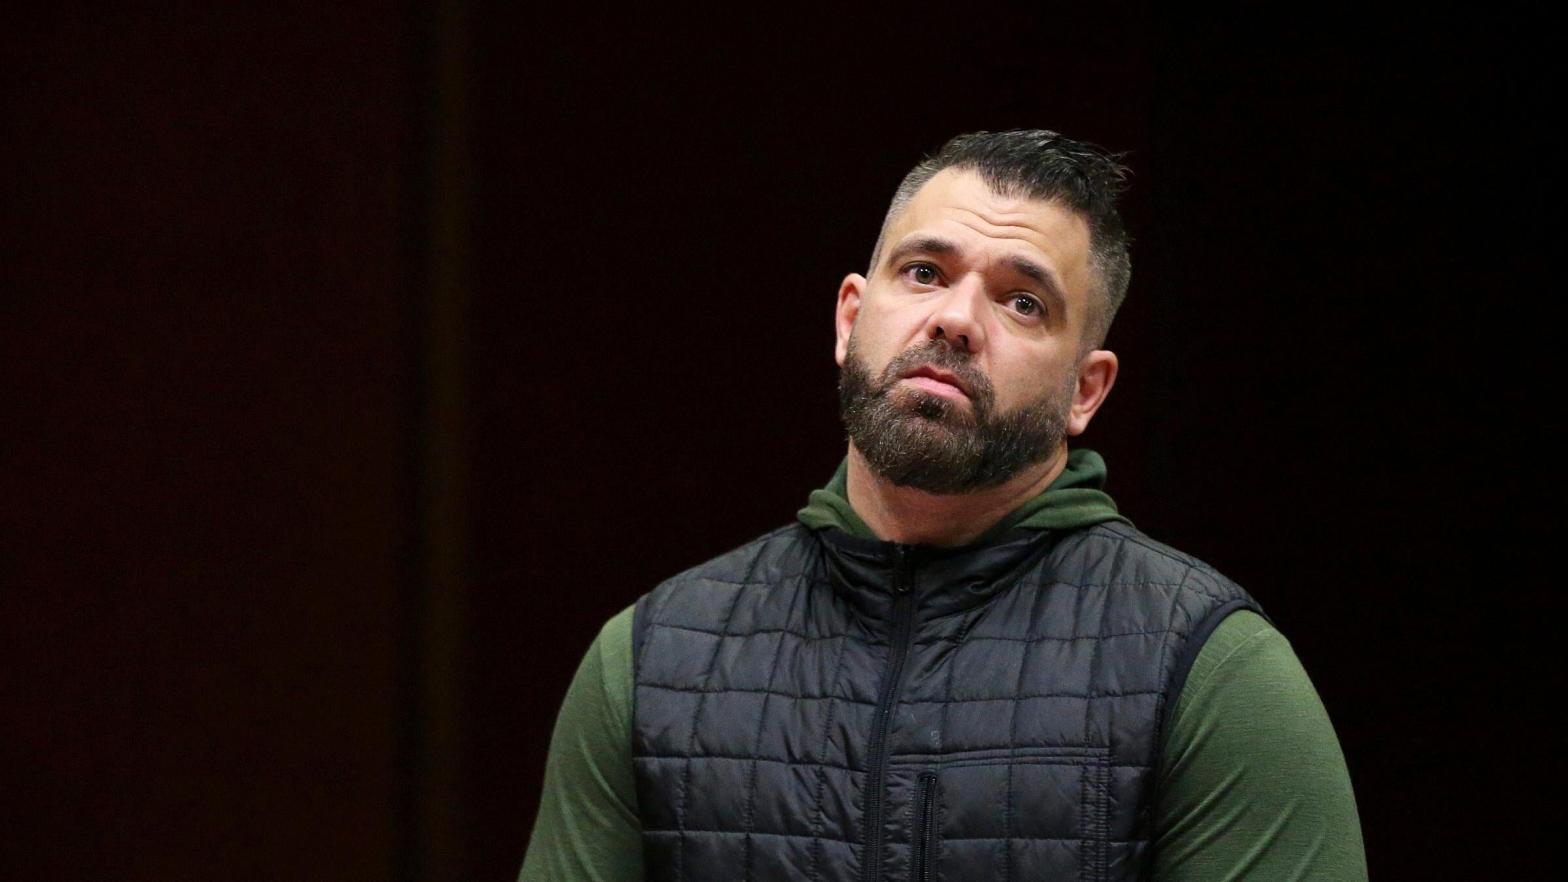 Mark D'Amico was sentenced to five years in prison for a $US400,000 ($555,280) GoFundMe scam. (Photo: Tim Tai/The Philadelphia Inquirer, AP)